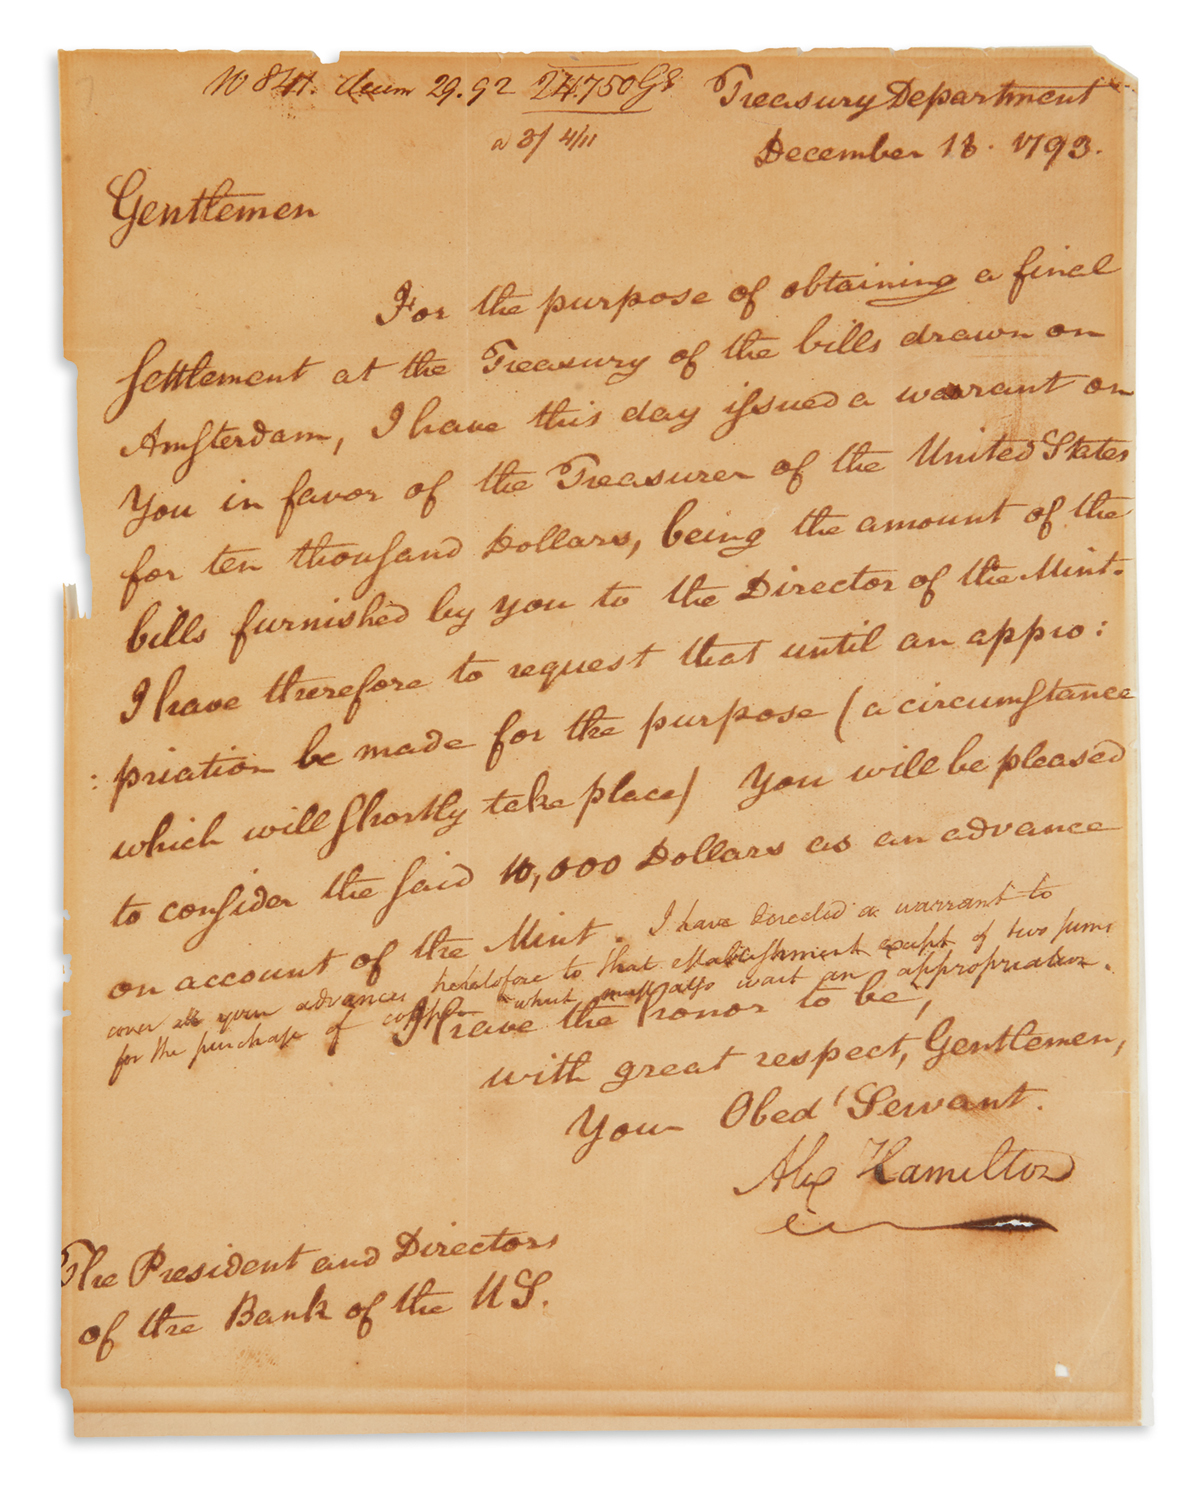 HAMILTON, ALEXANDER. Letter Signed, Alex Hamilton, as Secretary of the Treasury, to the President and Directors of the Bank of the U.